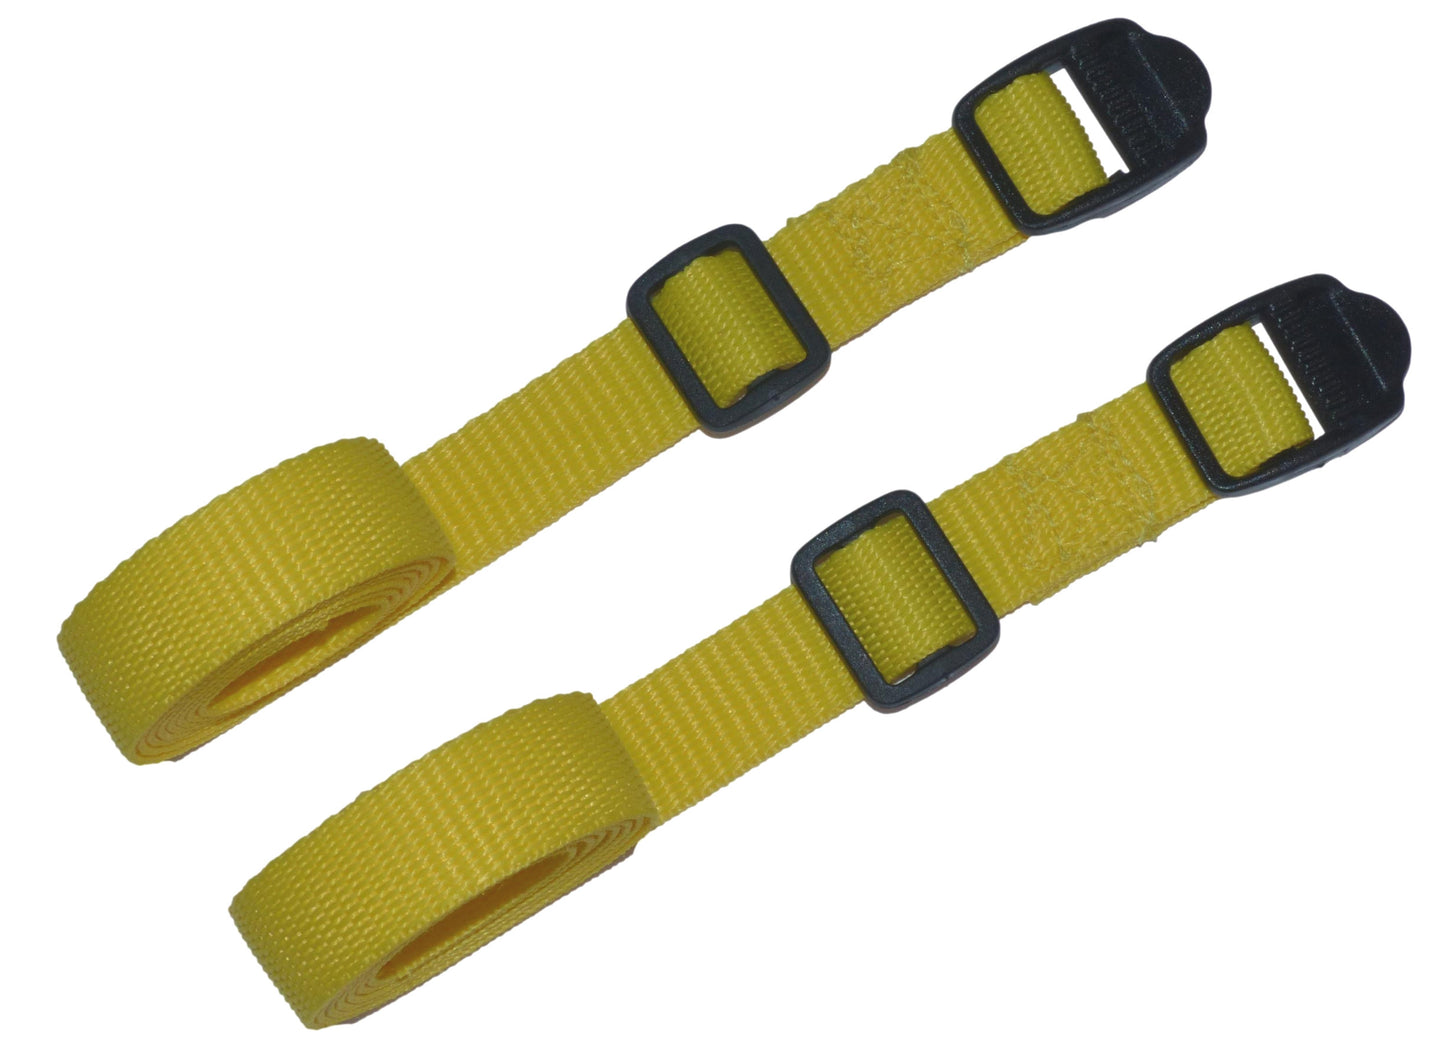 Benristraps 19mm Webbing Strap with Ladderlock Buckle (Pair) in yellow